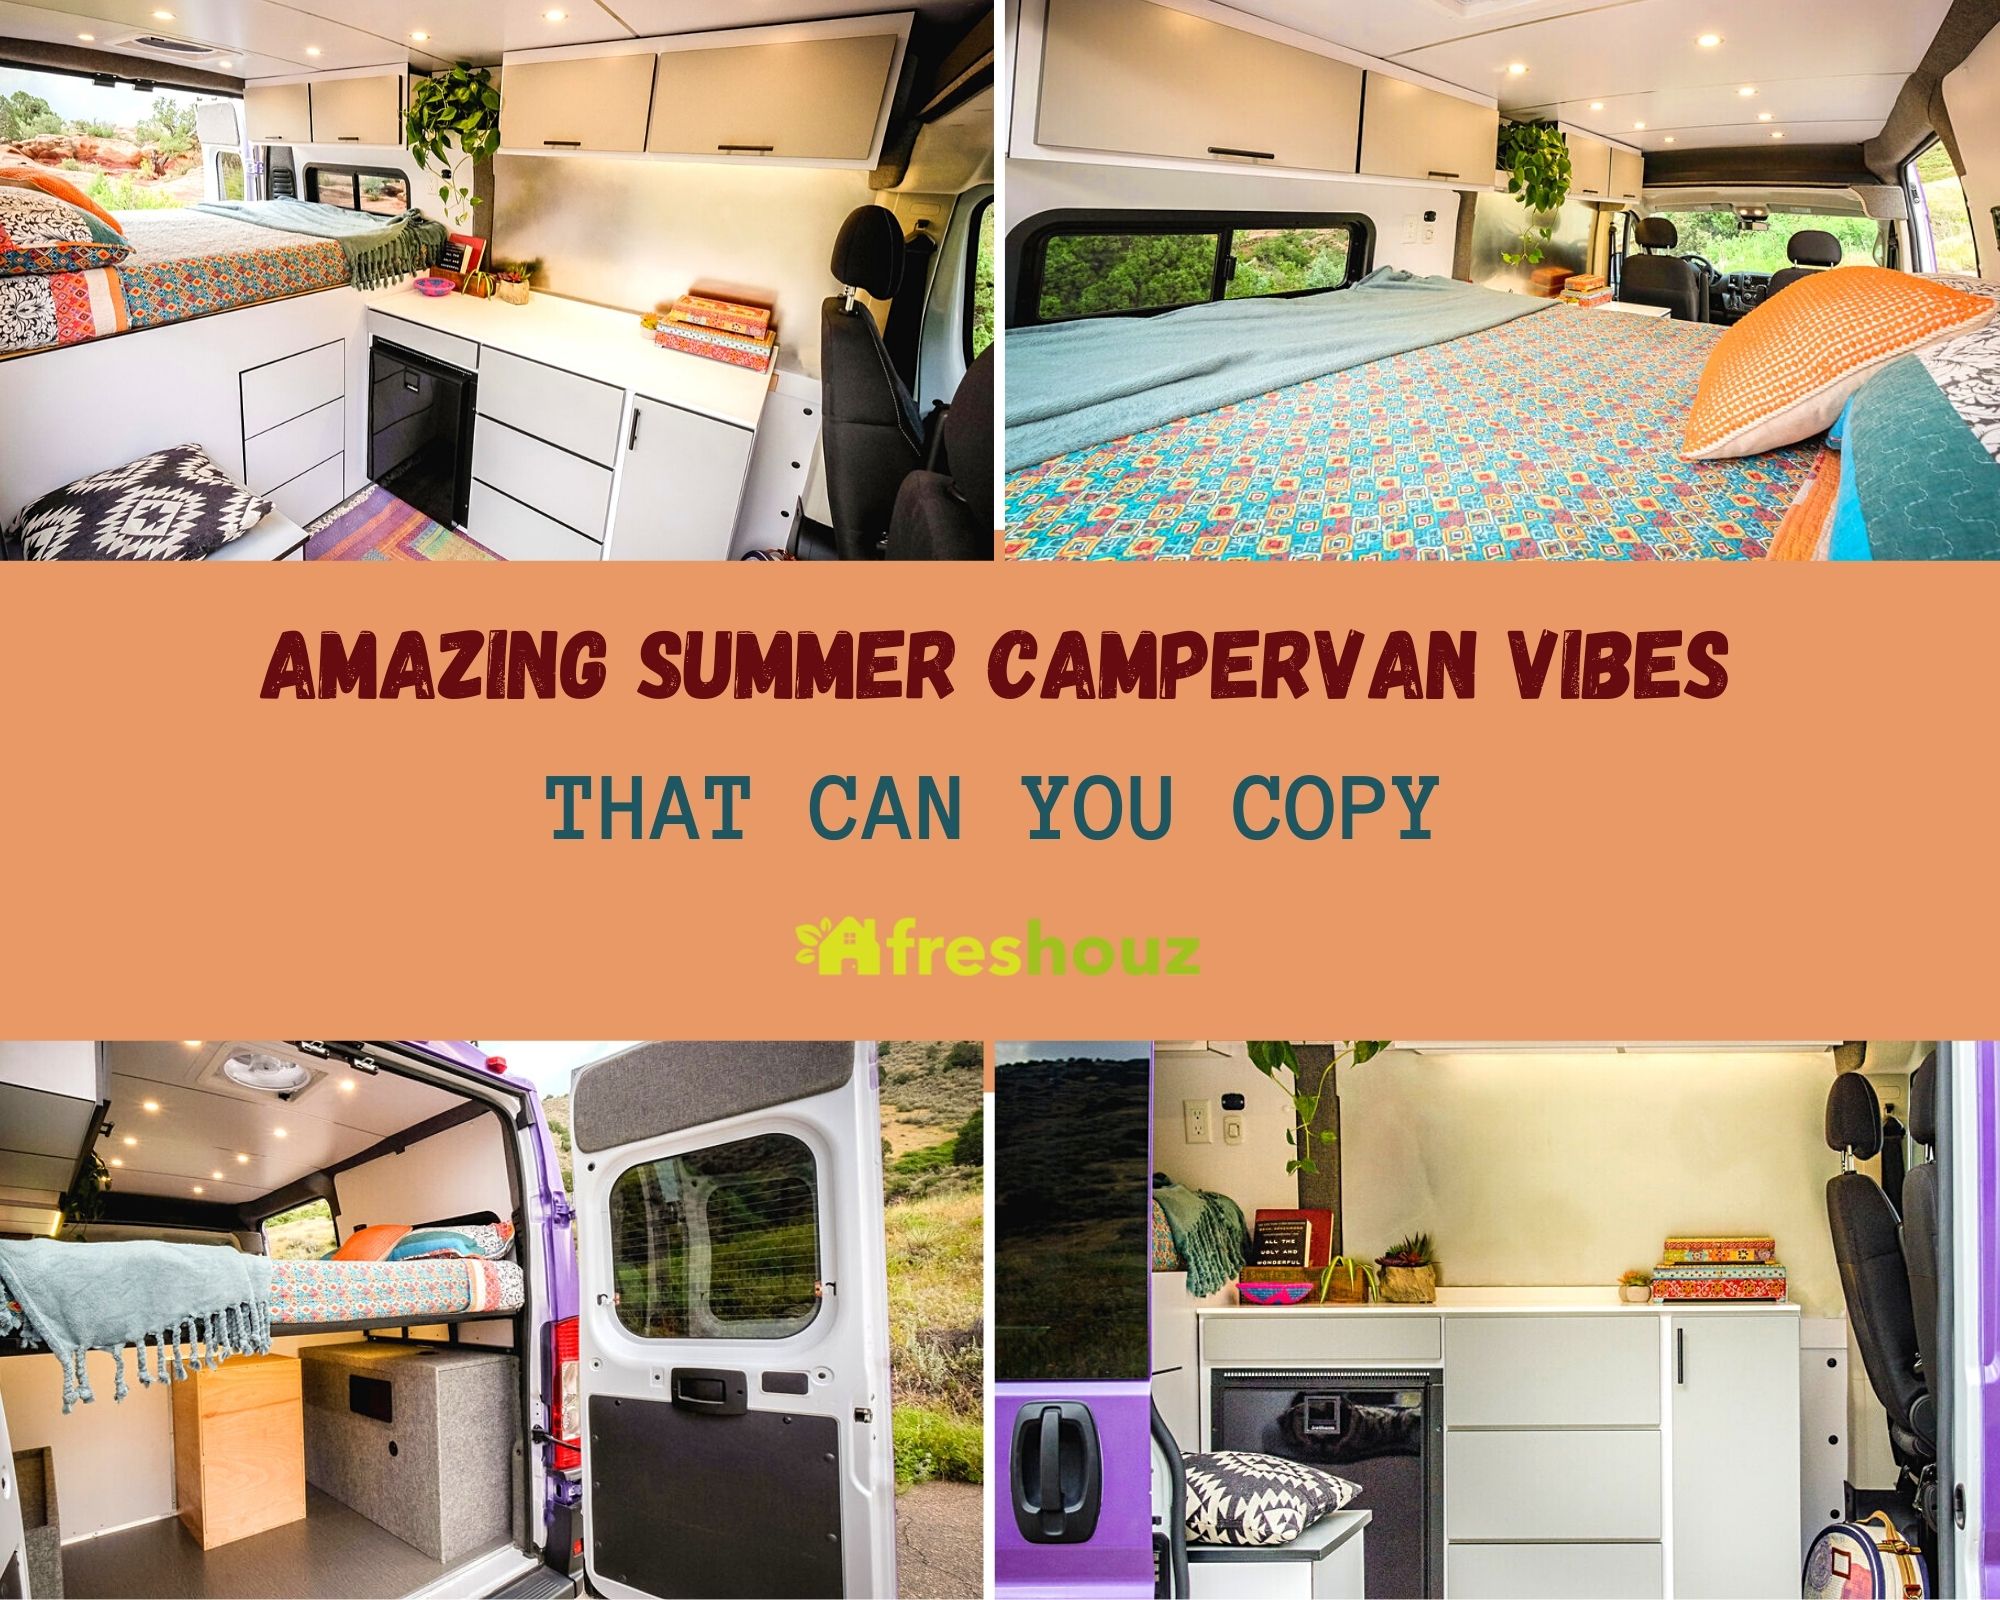 Amazing Summer Campervan Vibes That Can You Copy